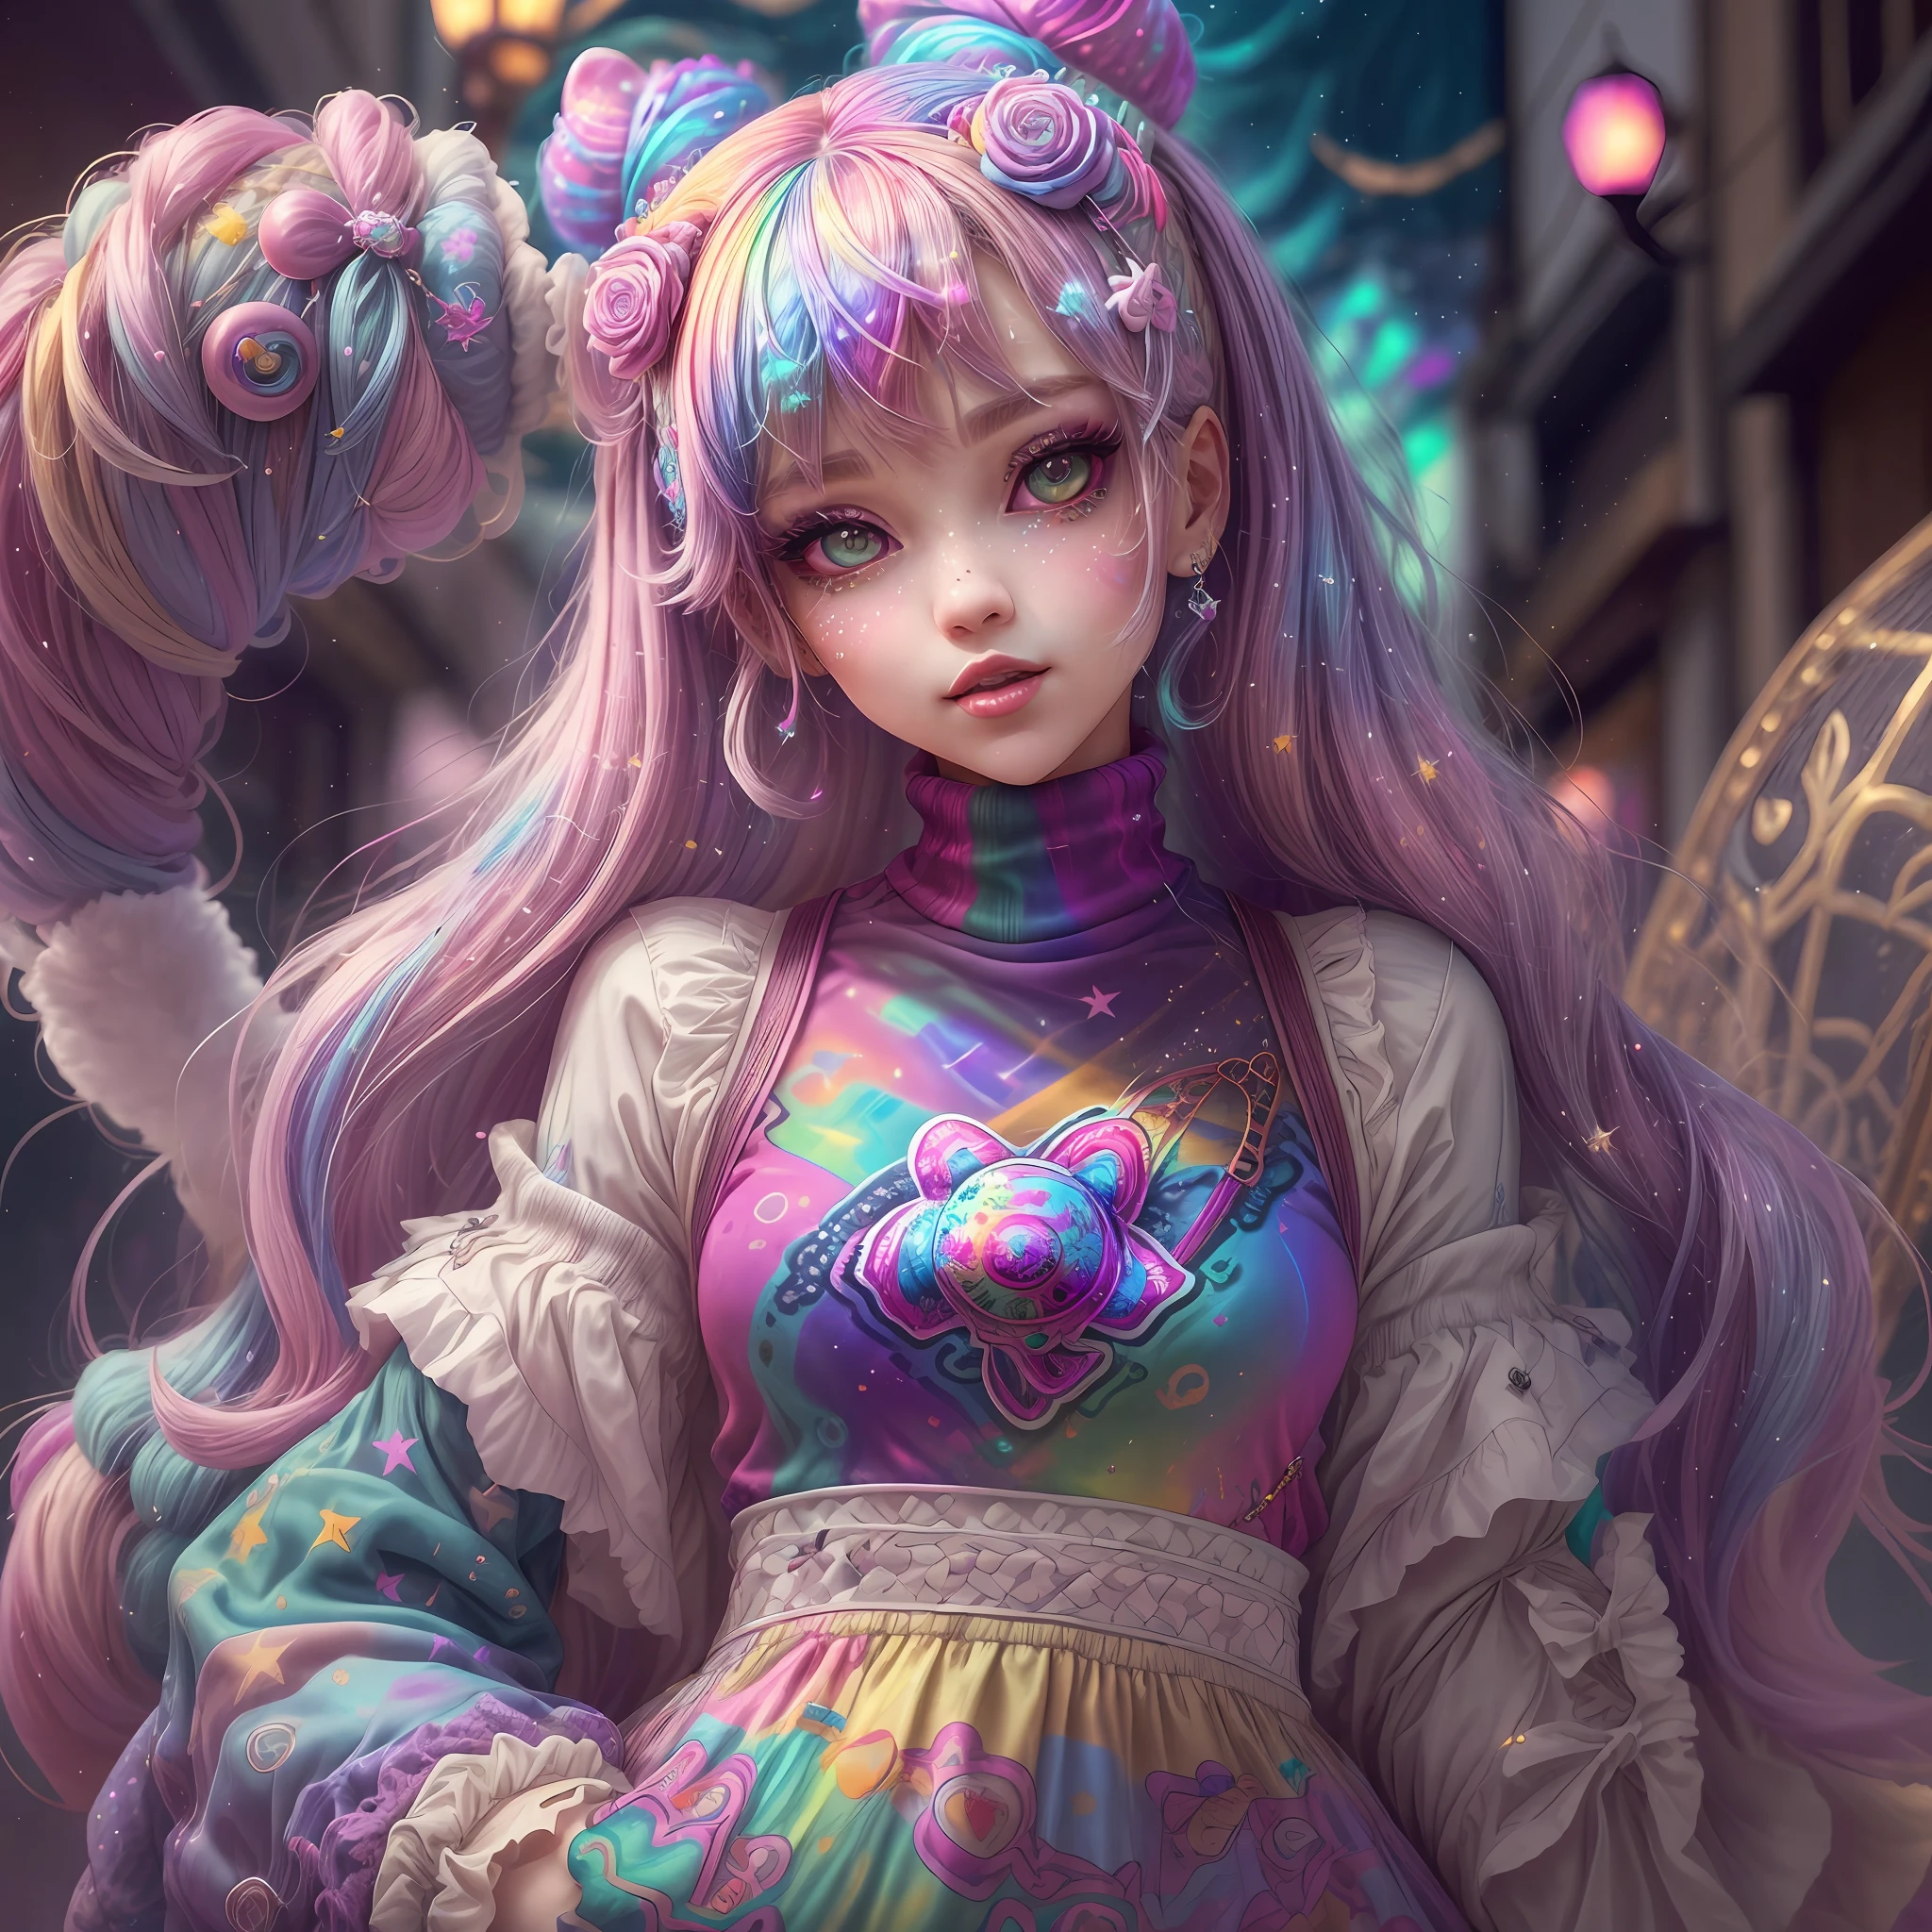 This image should be colorful and euphoric with extreme fantasy elements and very bold colors. Use (((lora:ArcherTurtleneck:1))). Generate a beautiful  witch with ornate and highly detailed Decora Harajuku fashion aesthetics on an interesting Harajuku street background. Her head, torso, and hips are in frame. The witch should have a mature face with a lot of character and visual interest. Include beautiful eyes, highly detailed eyes, extremely detailed eyes, intricate eyes, 8K eyes, macro eyes. Pay close attention to intricate facial details and realistic eye shading. Include bright lisa frank rainbow colors. ((Include many realistic fantasy and rainbow Harajuku and decora details)). Clothing should be very detailed and intricate in the style of extravagant Harajuku decora street fashion with a heavy emphasis on rainbow colors. Her shirt should contain contrasting textures, colors, and patterns (((lora:ArcherTurtleneck:1))). Her pants should be highly detailed and contain contrasting textures, colors, and patterns. The image is the highest quality possible, with rich colors and an extremely high resolution. Consider influences like the artwork and colors of Lisa Frank. Utilize bright ambient lighting and dynamic composition to enhance a feeling of happiness and ((euphoria)). The image should contain shimmer, phantasmal iridescence, crystals, and bumps. (((lora:ArcherTurtleneck:1))). (((Include many decora fashion accents.))), extreme angles